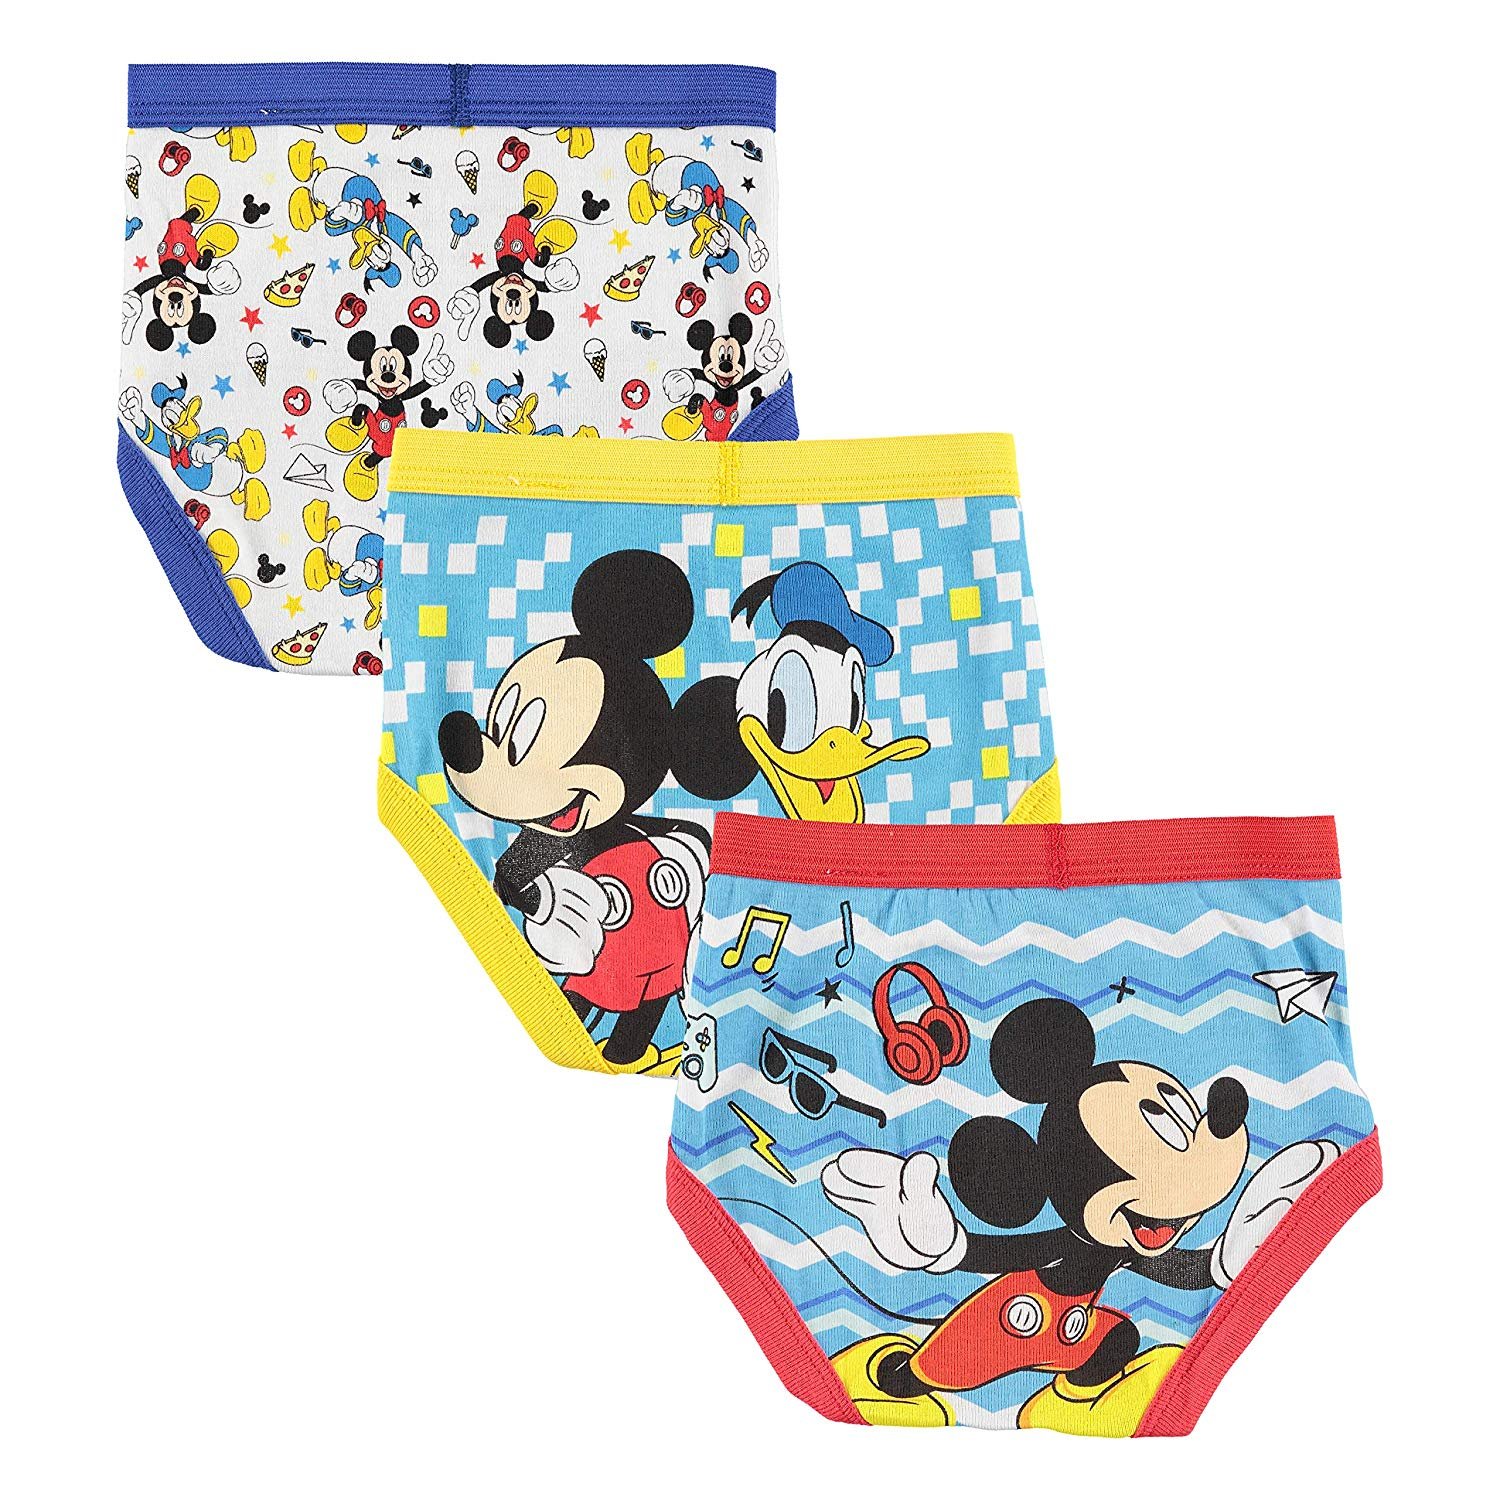 Disney Boys' Toddler Mickey Mouse 3-Pack or 7-Pack Briefs 18M, 2